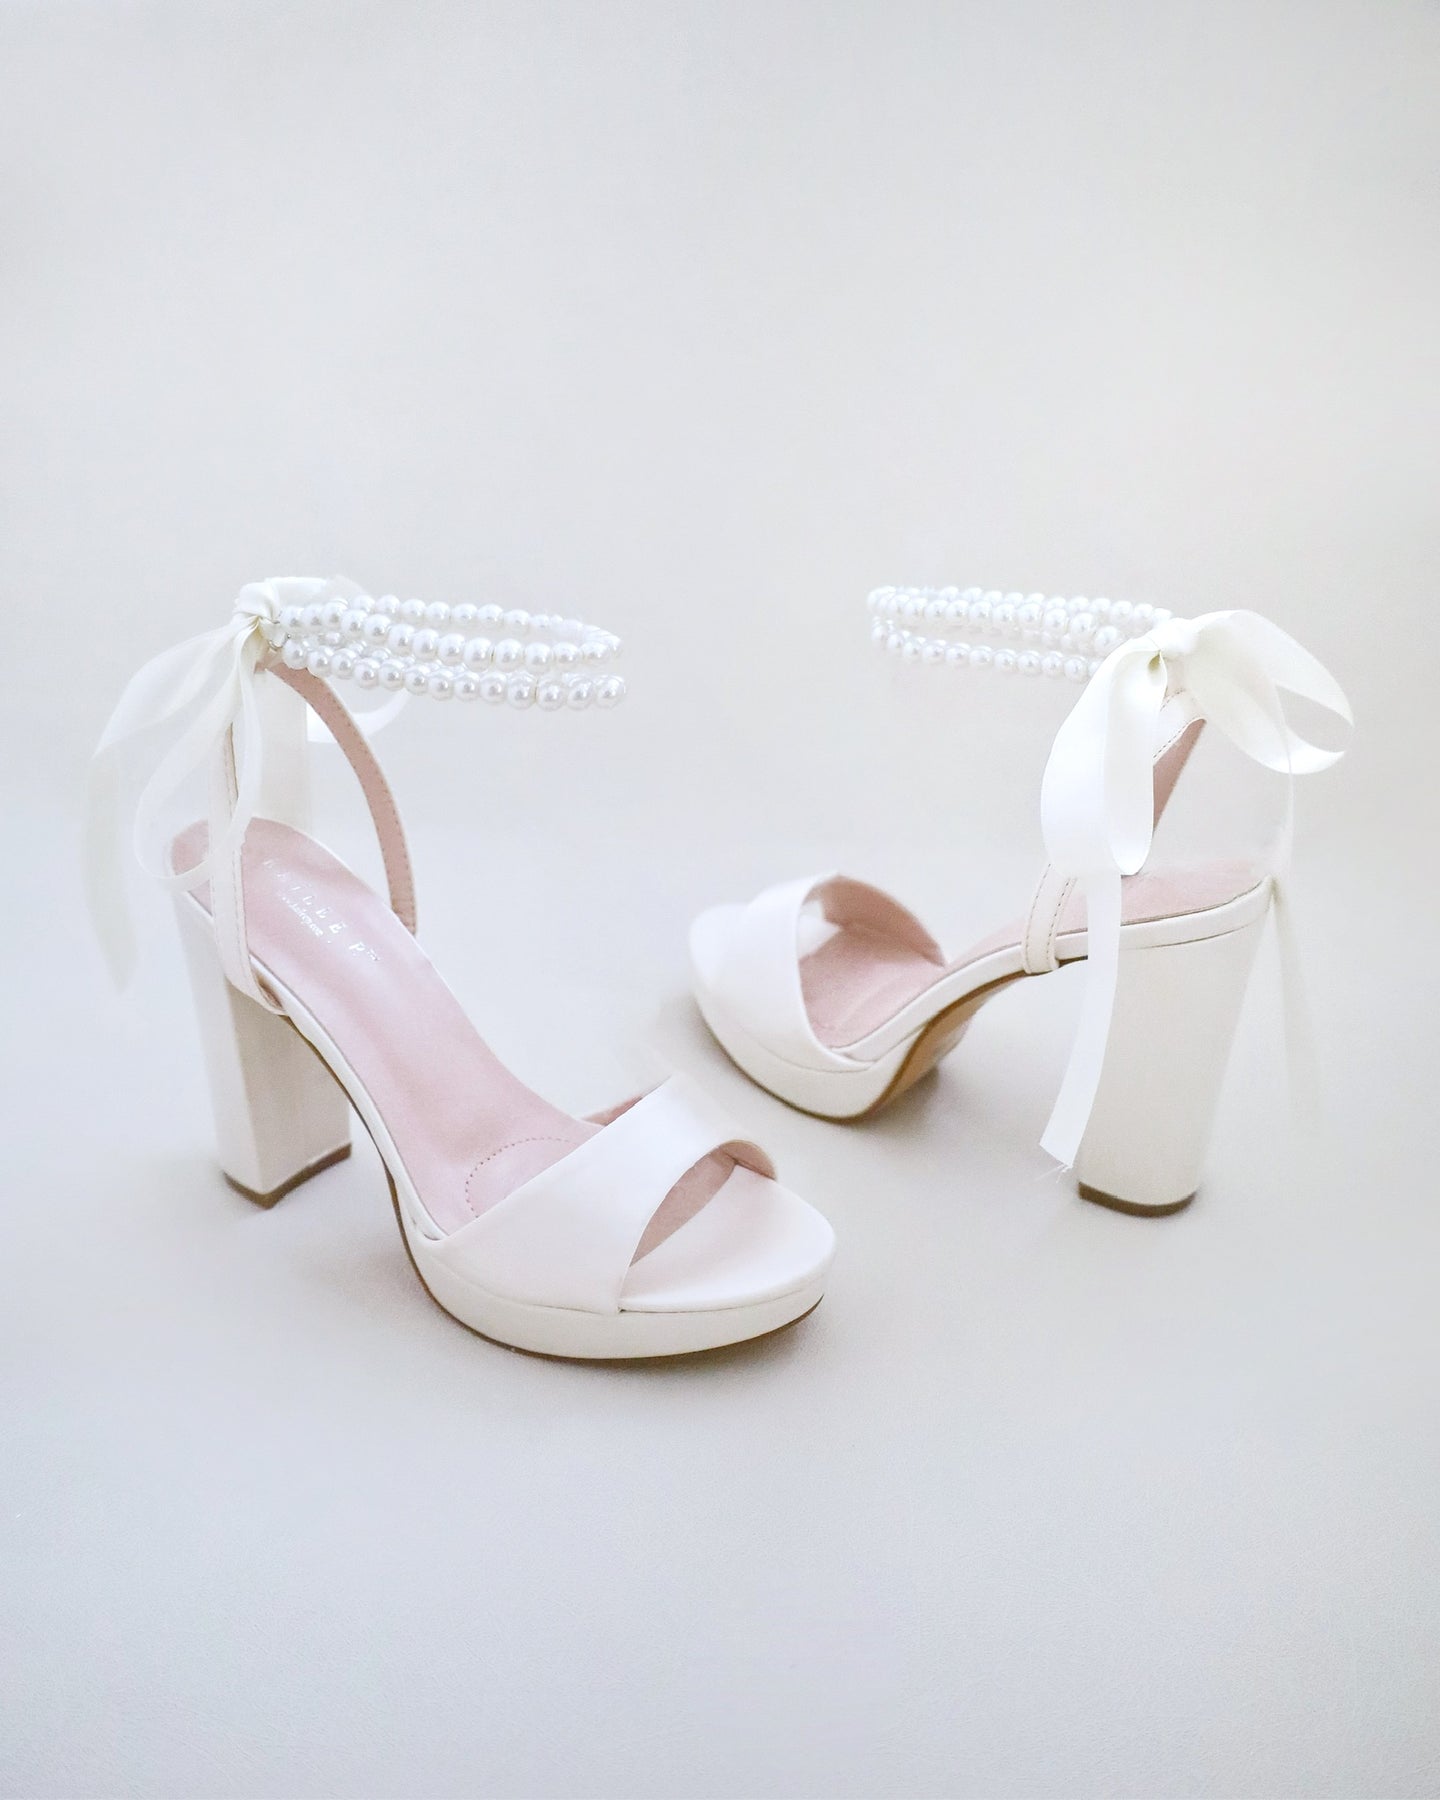 Lace Ivory White color bride wedding shoes pearls straps high heels Bridal  Bridesmaids shoes | Wish